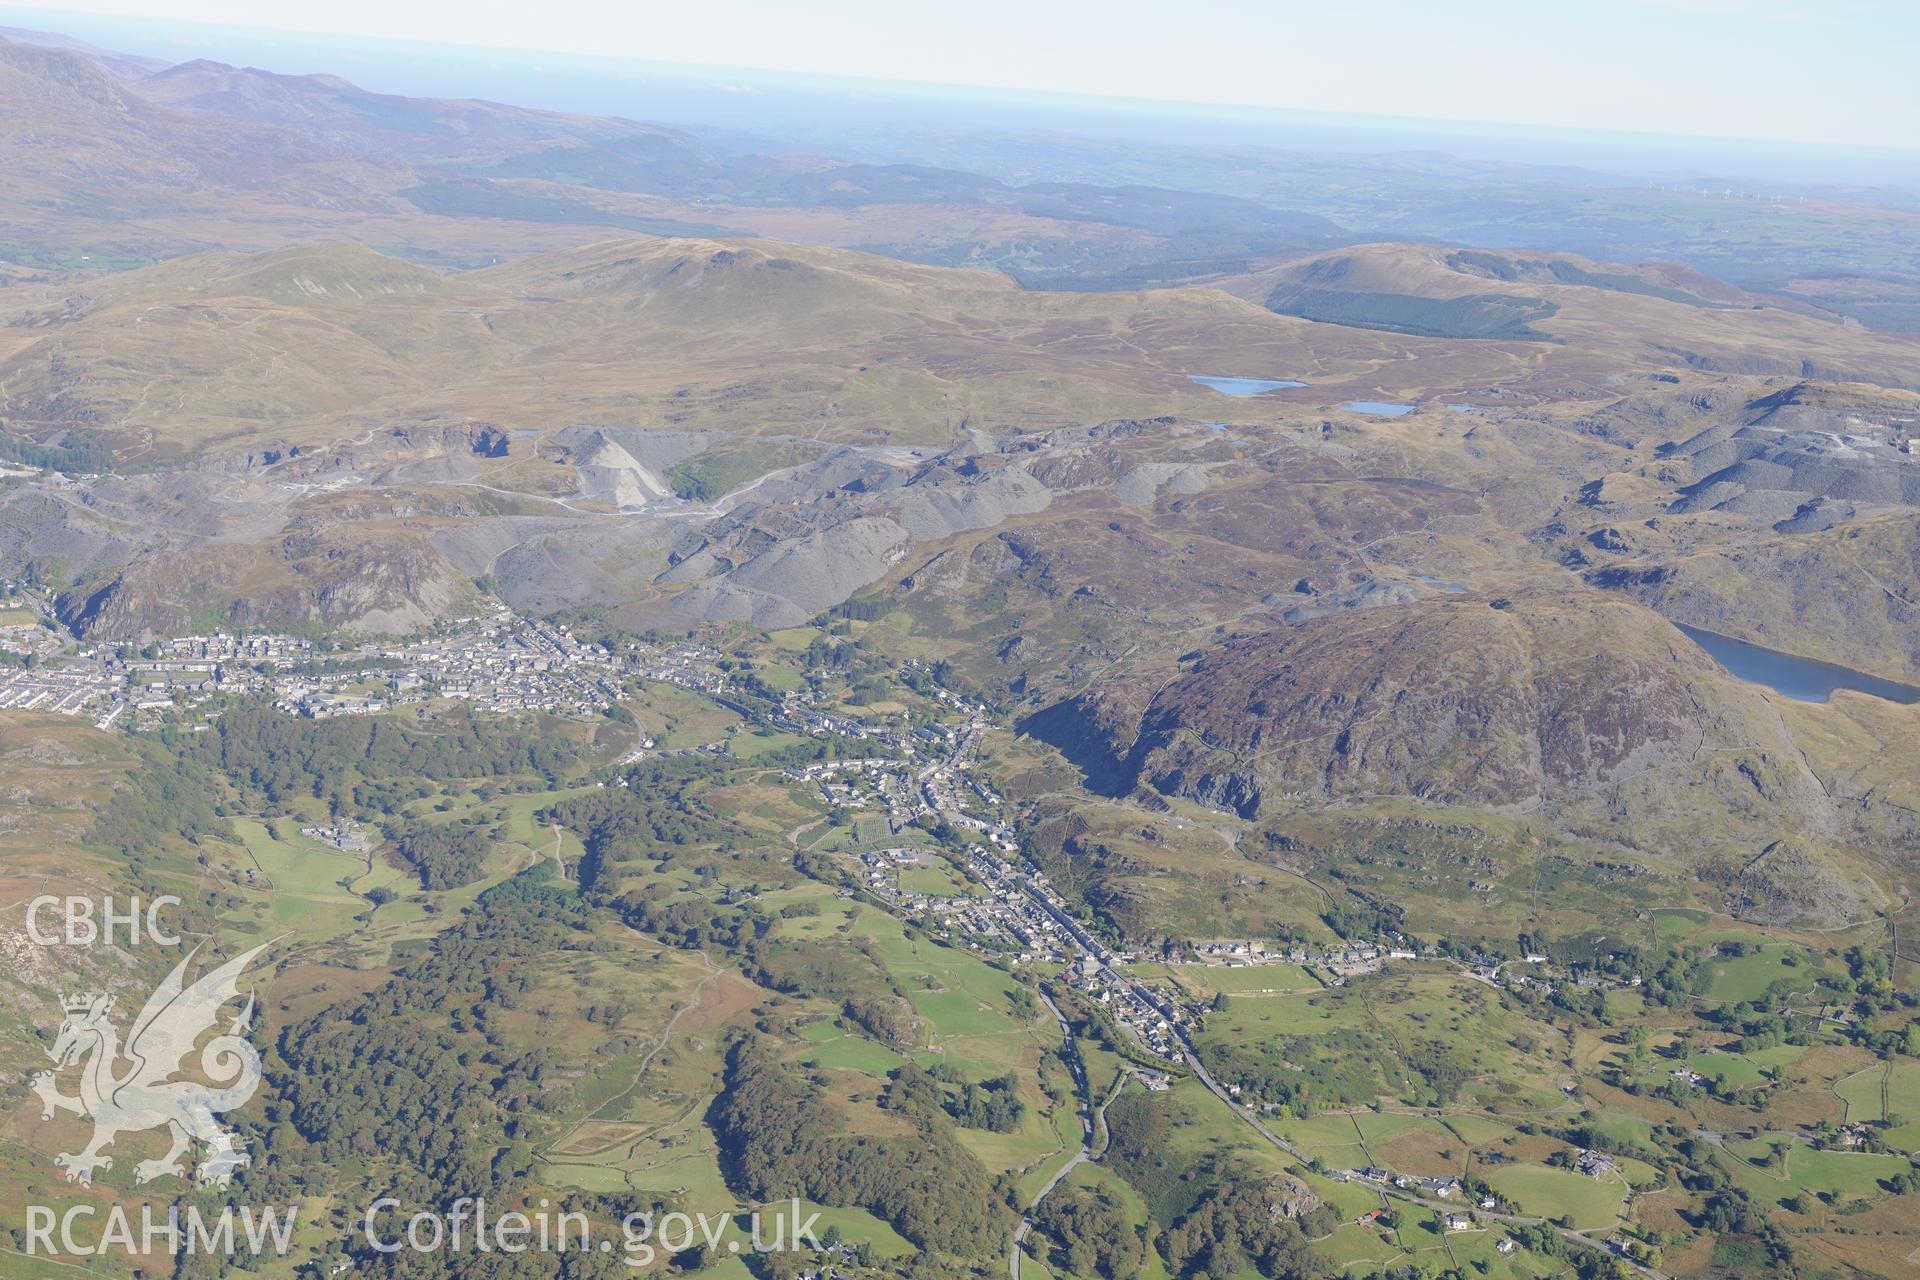 Oakley slate quarry and Llechwedd slate quarry, with Blaenau Ffestiniog below. Oblique aerial photograph taken during the Royal Commission's programme of archaeological aerial reconnaissance by Toby Driver on 2nd October 2015.